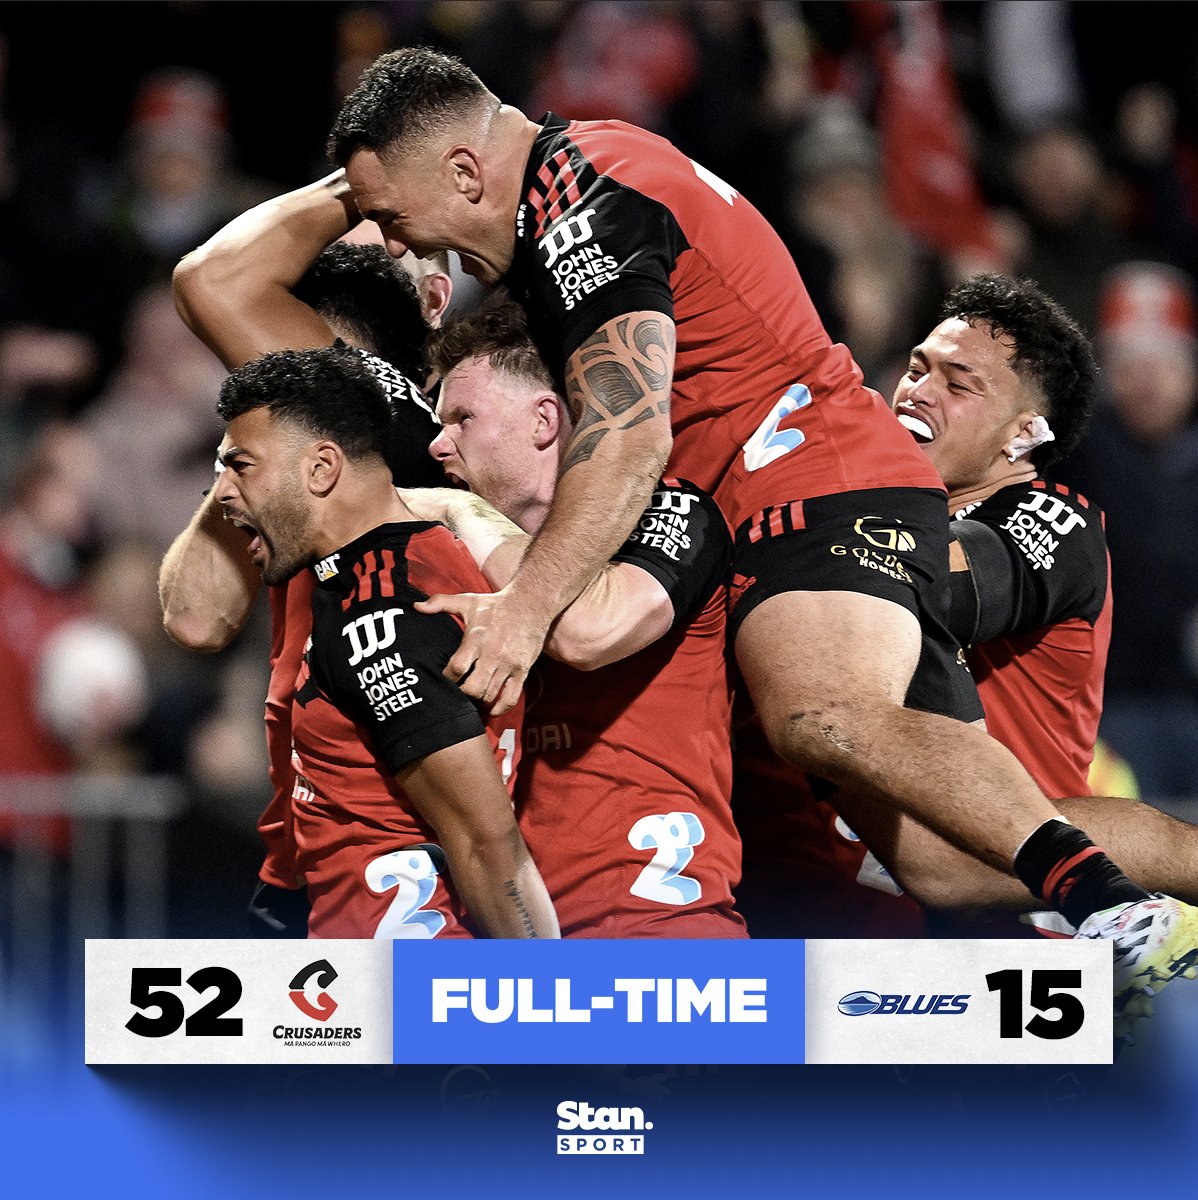 The Crusaders demolish the Blues to stake their claim towards a 14th title against the Chiefs or the Brumbies! 🔥

↳ Super Rugby Pacific. Crusaders v Blues. Every Match. Ad-Free. Live & On Demand on the Home of Rugby, Stan Sport.

#StanSportAU #SuperRugbyPacific #CRUvBLU